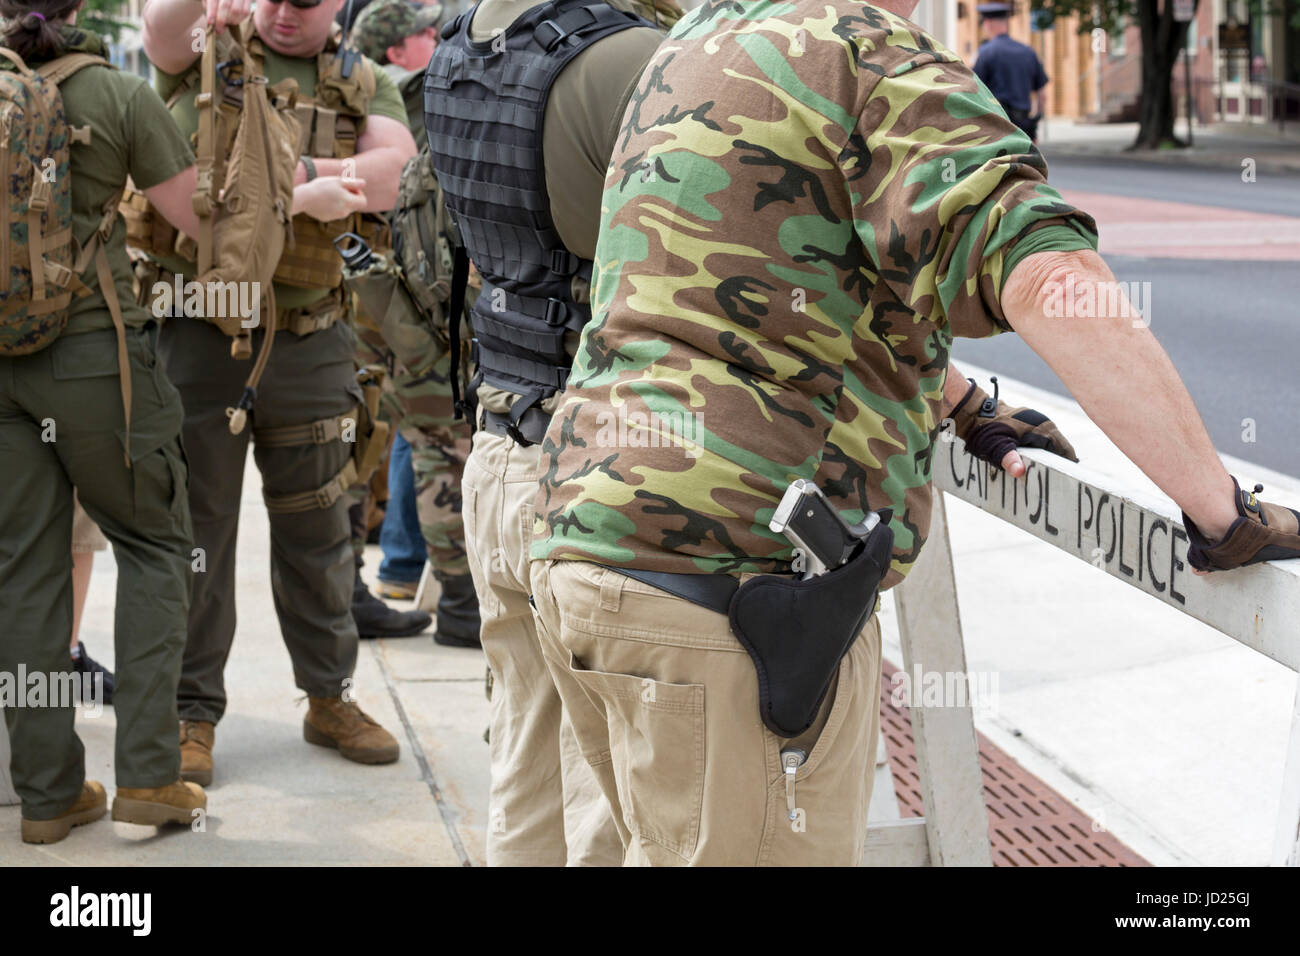 Harrisburg, Pennsylvania - Armed members of the Three Percenters, the Patriot Movement, and the Oath Keepers guarded an anti-Muslim rally organized by Stock Photo